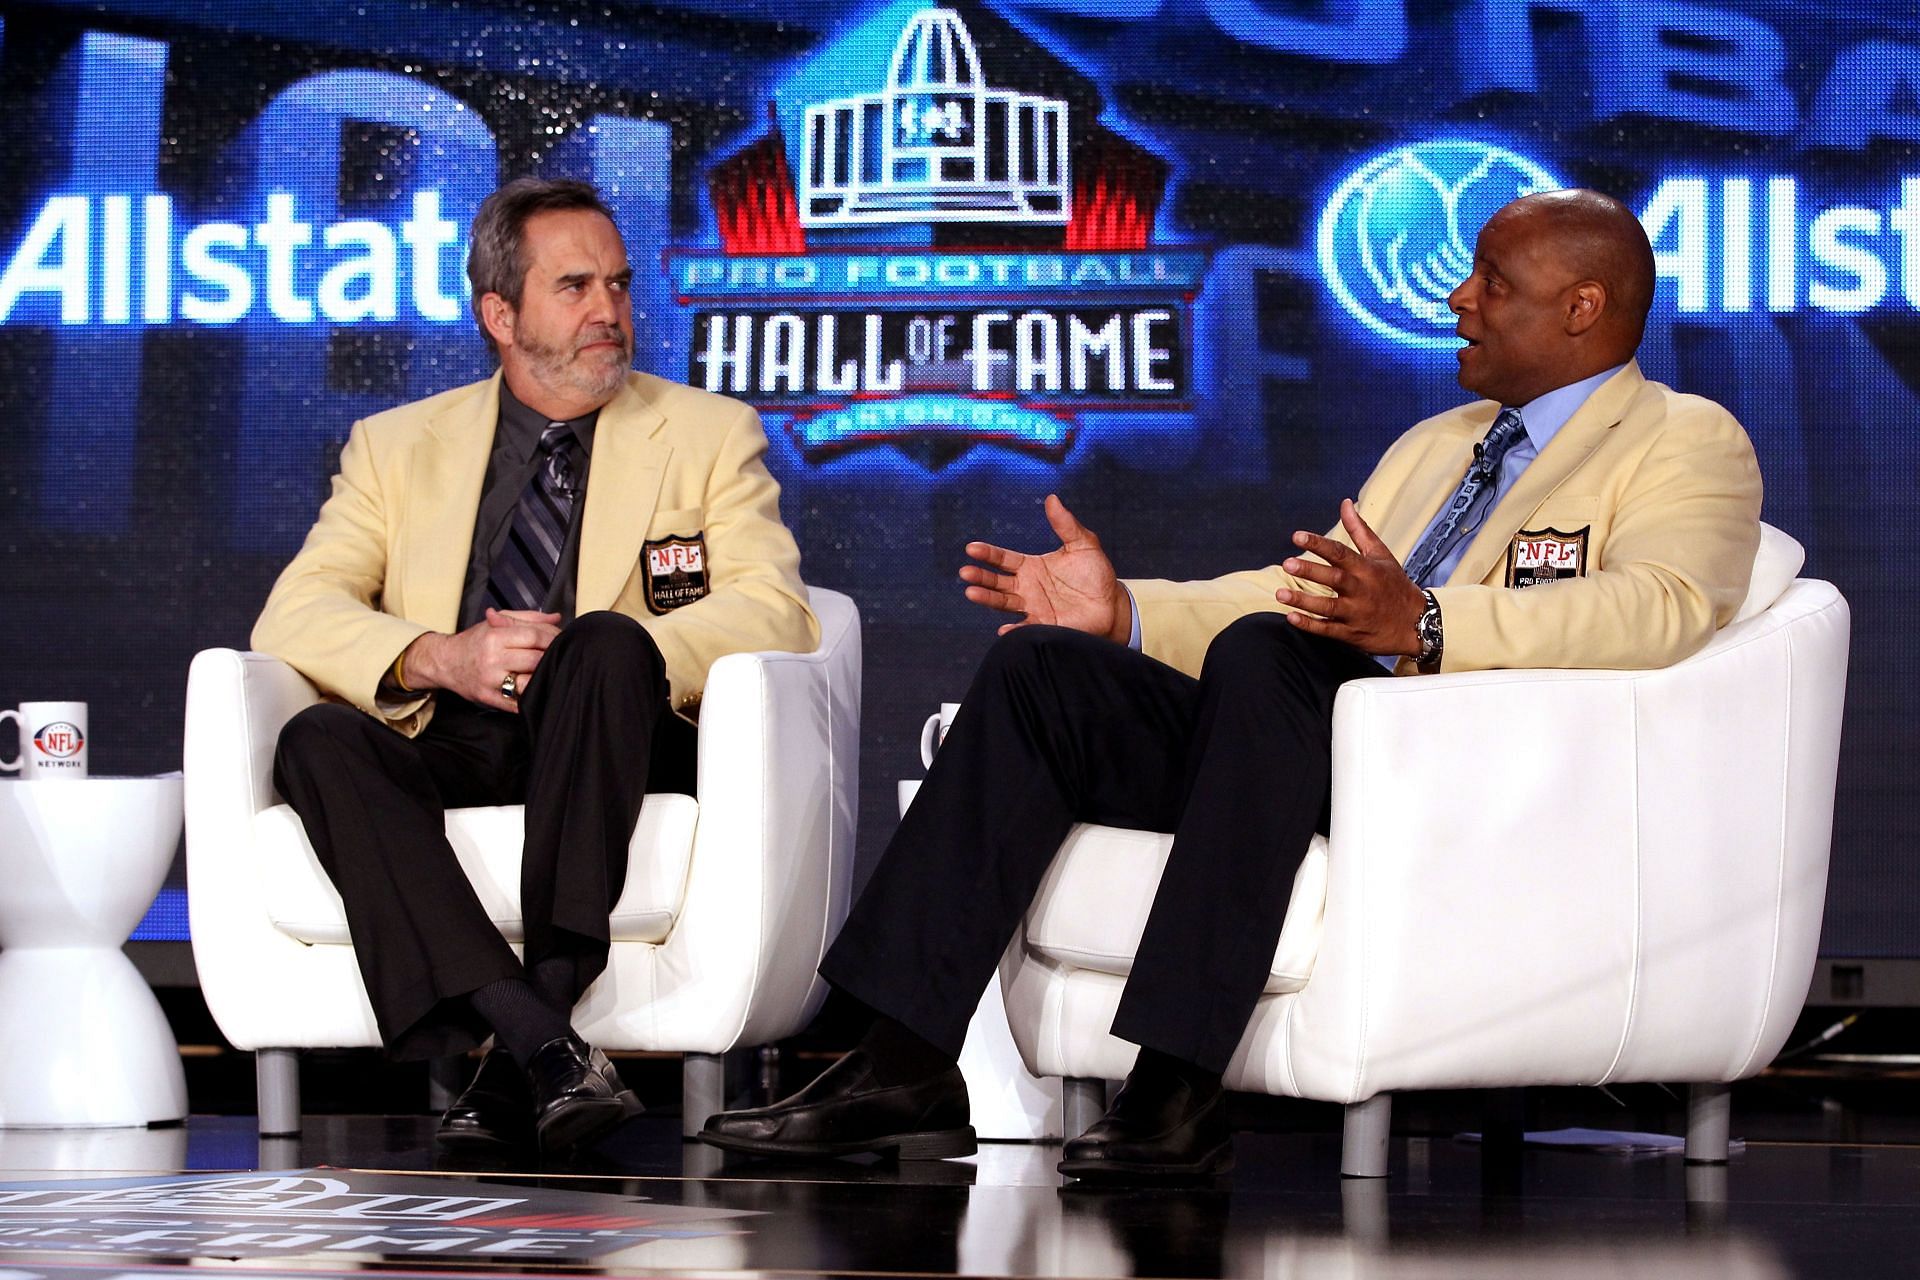 Pro Football Hall of Fame News Conference